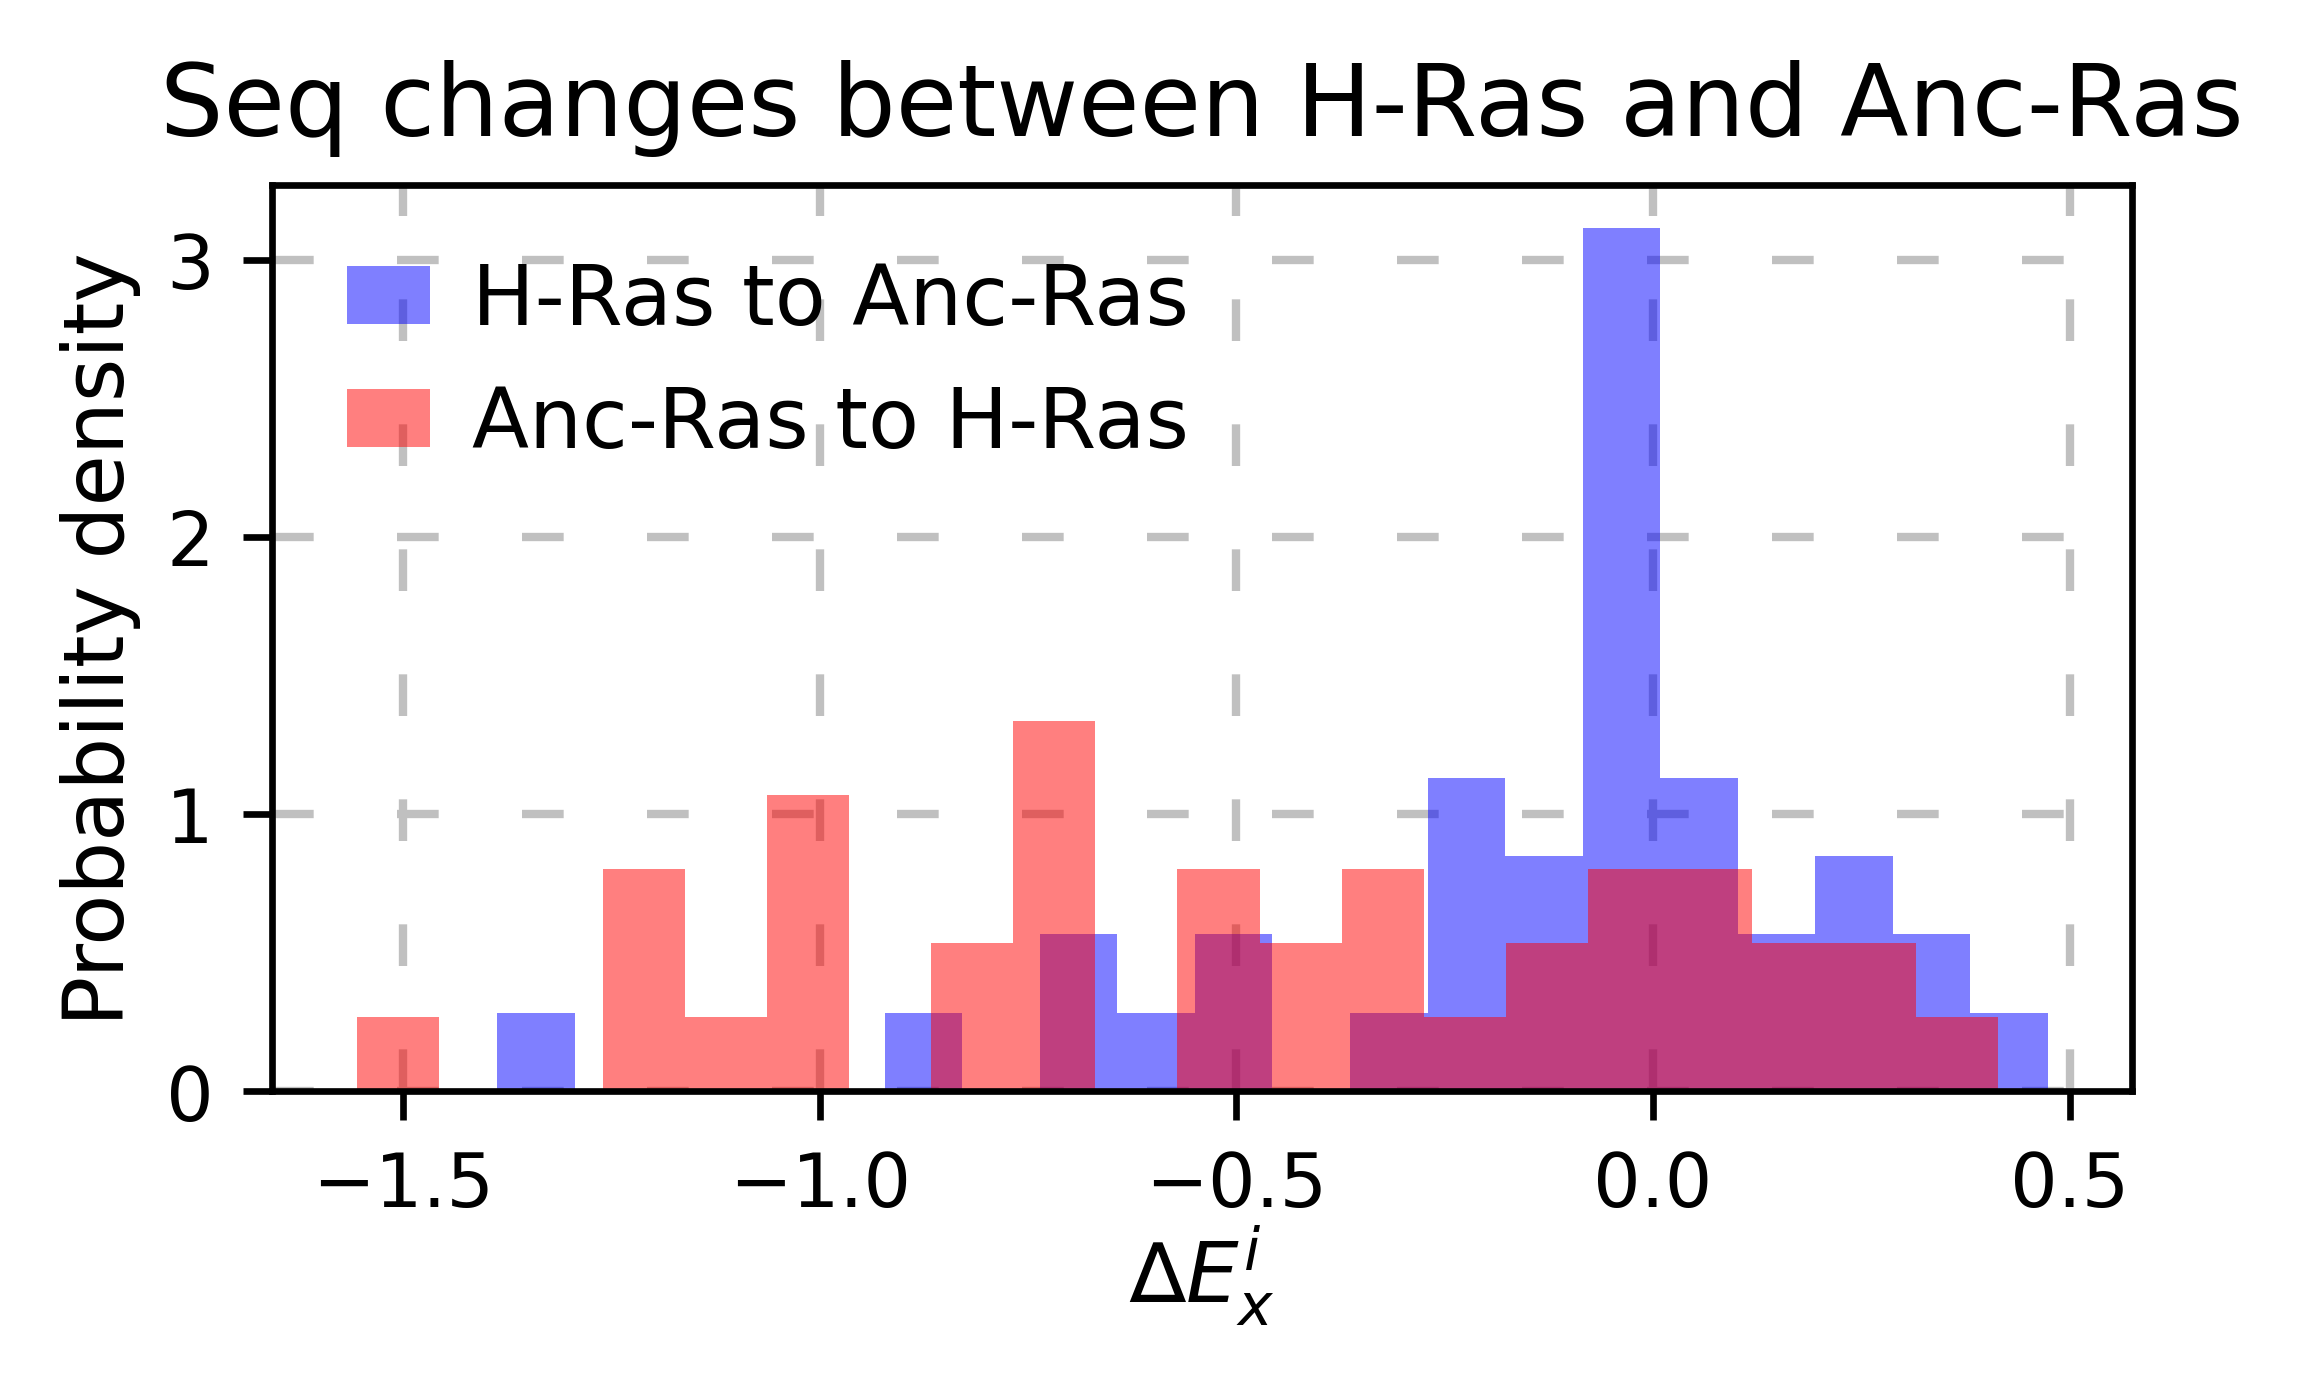 _images/hras_histogram_A_to_B.png